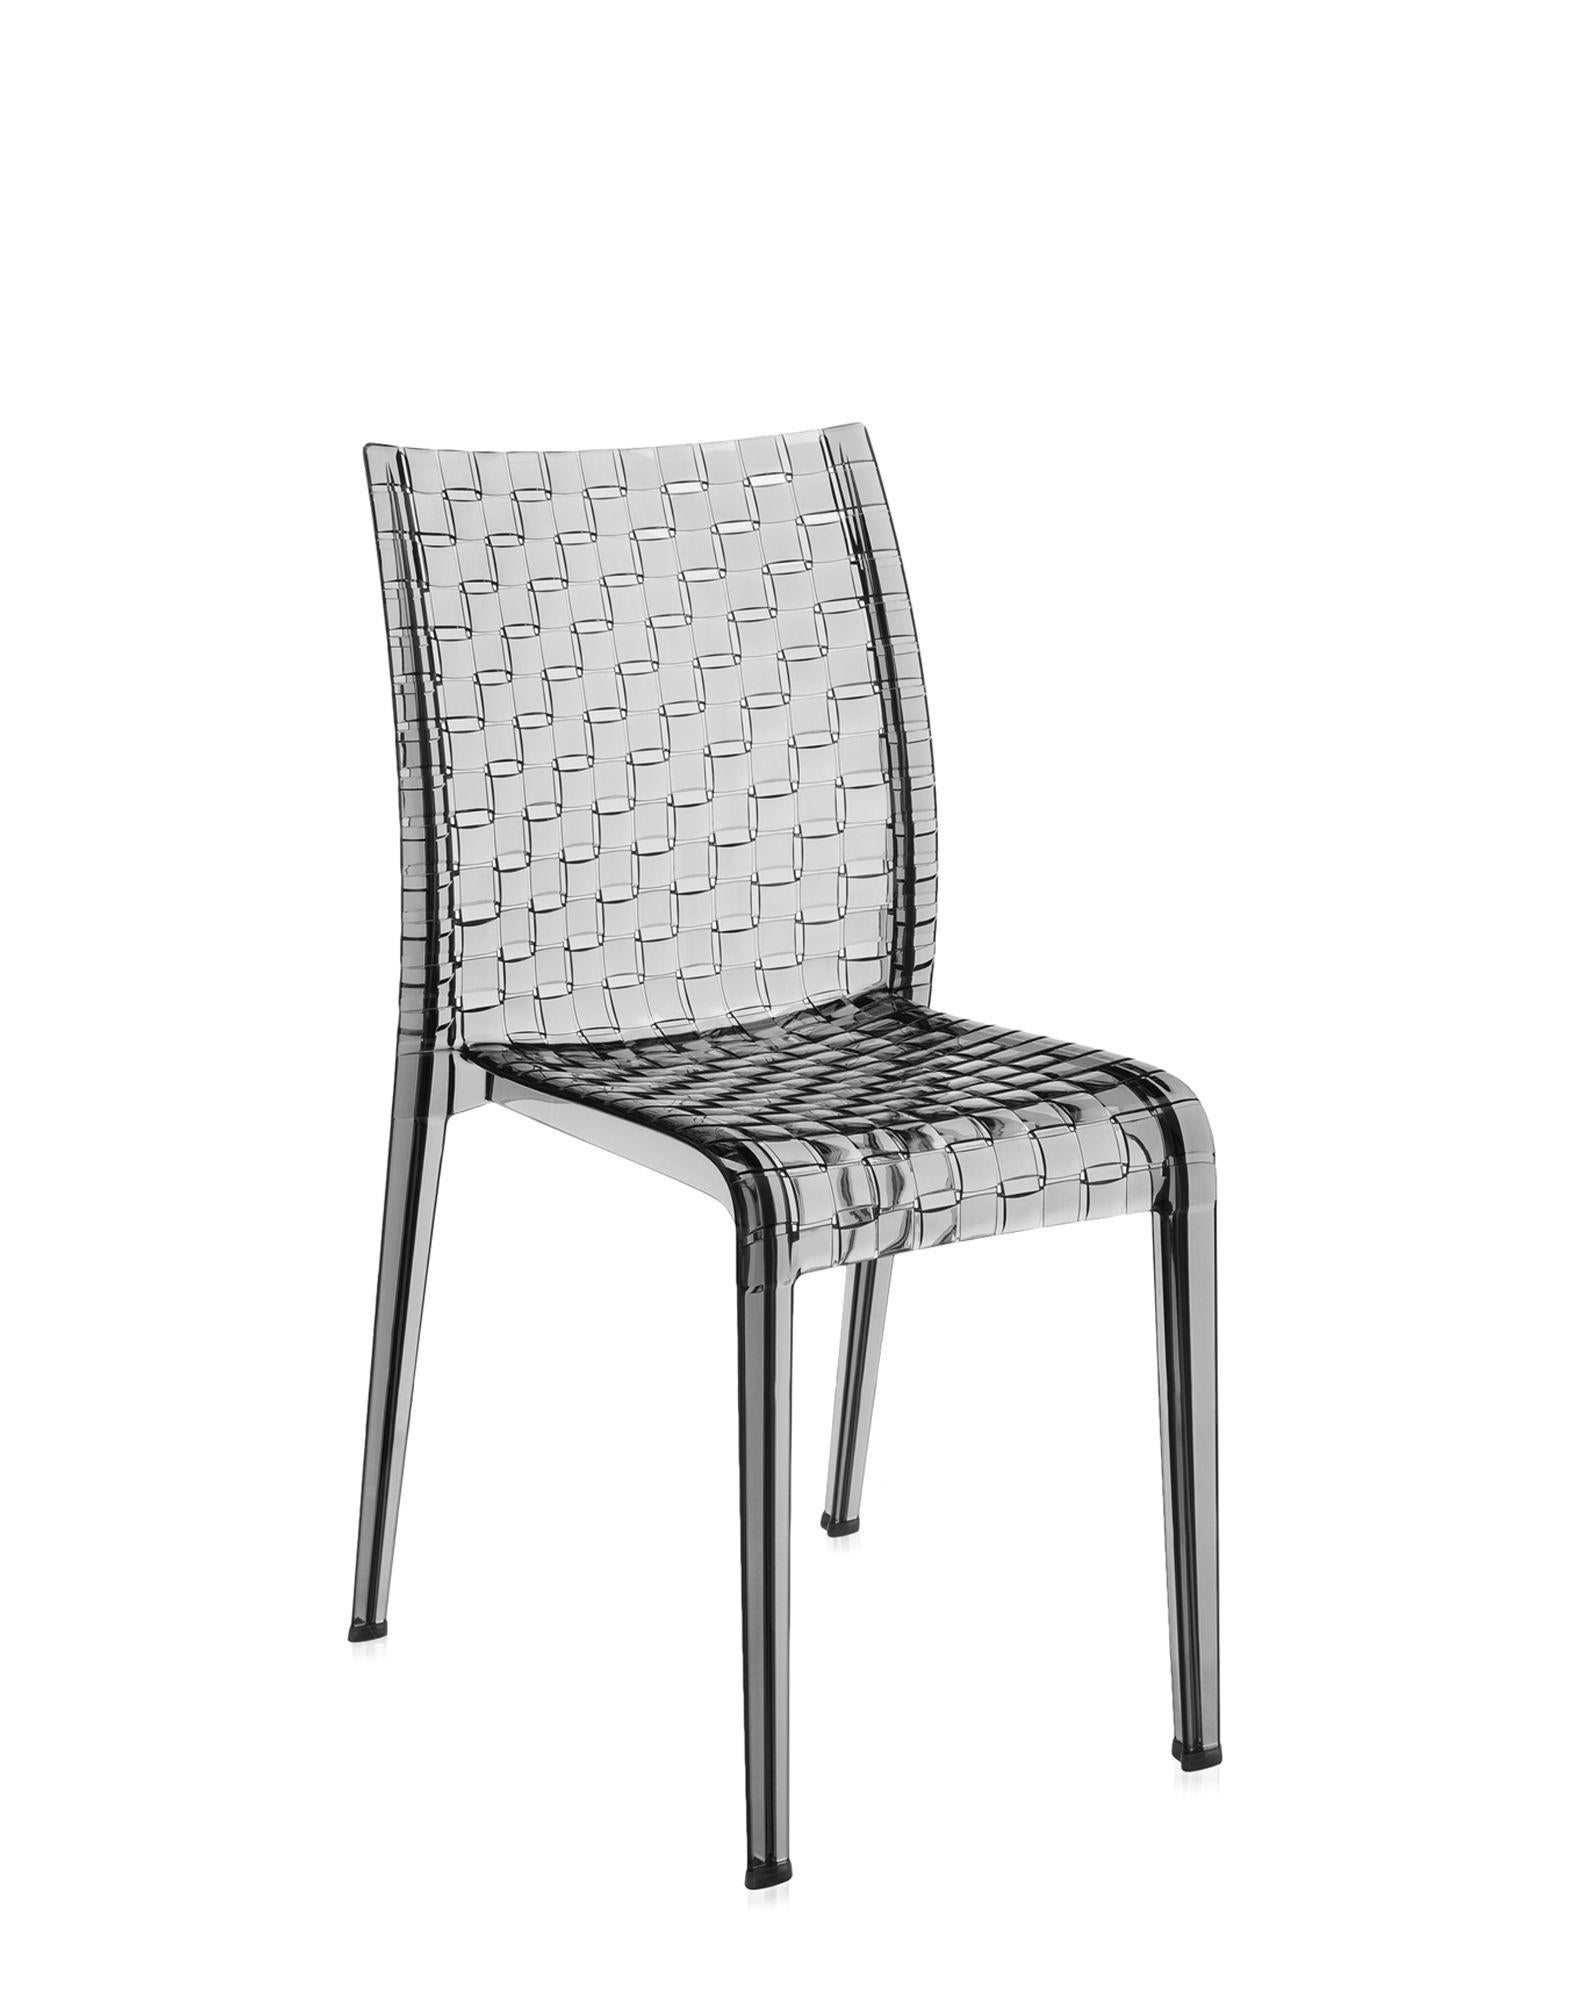 Inspired by the way pattern and texture interweave in a fabric, the Ami Ami chair (its name in Japanese literally means 